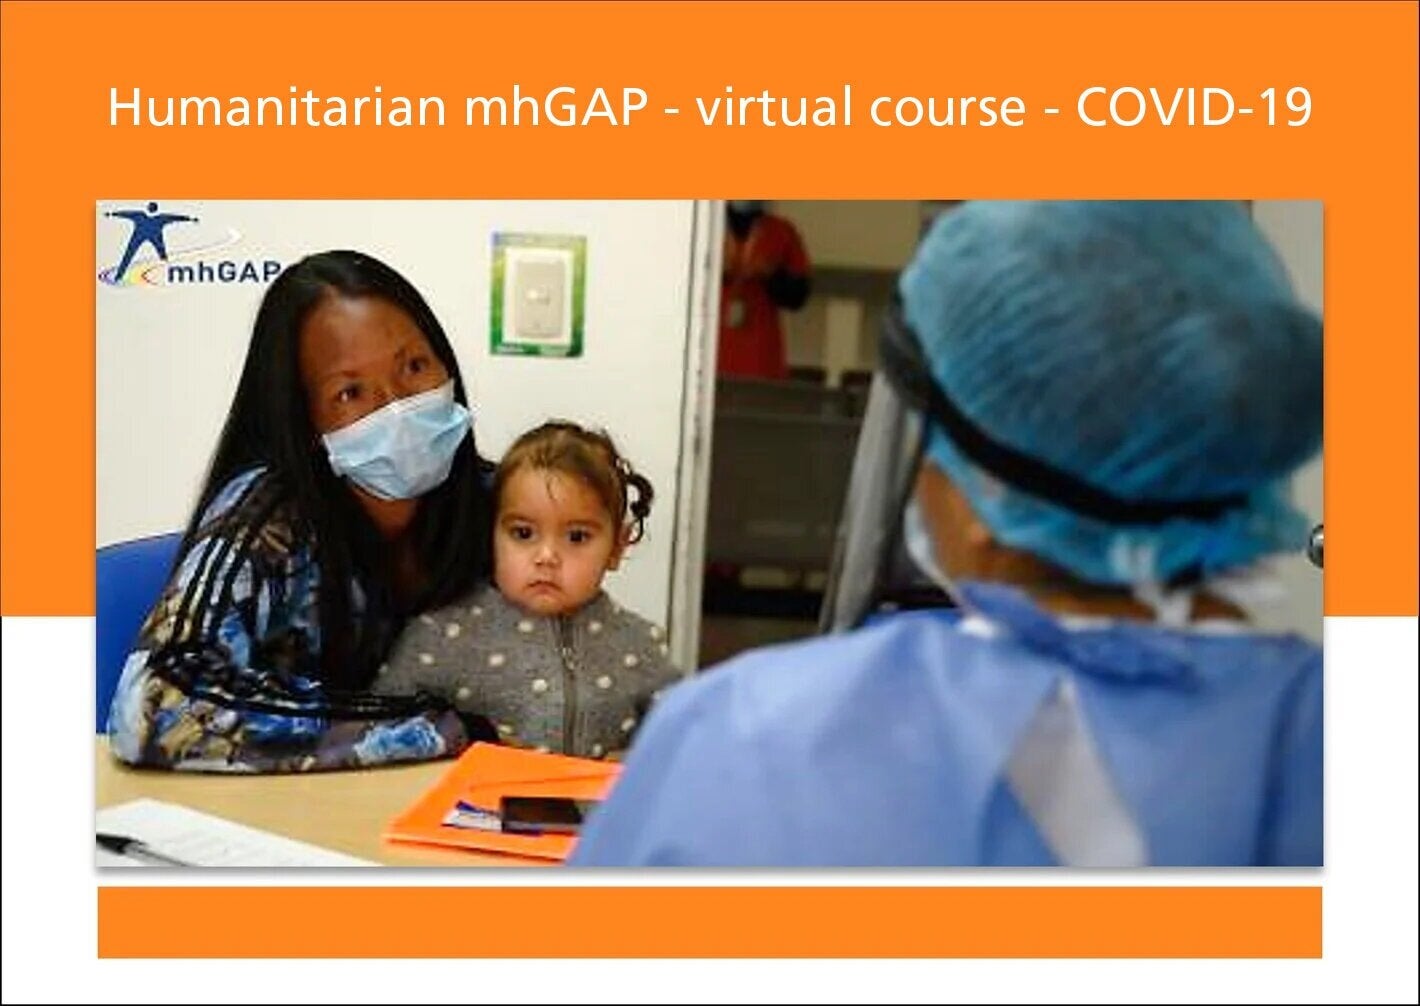 Launch of the humanitarian mhGAP virtual course